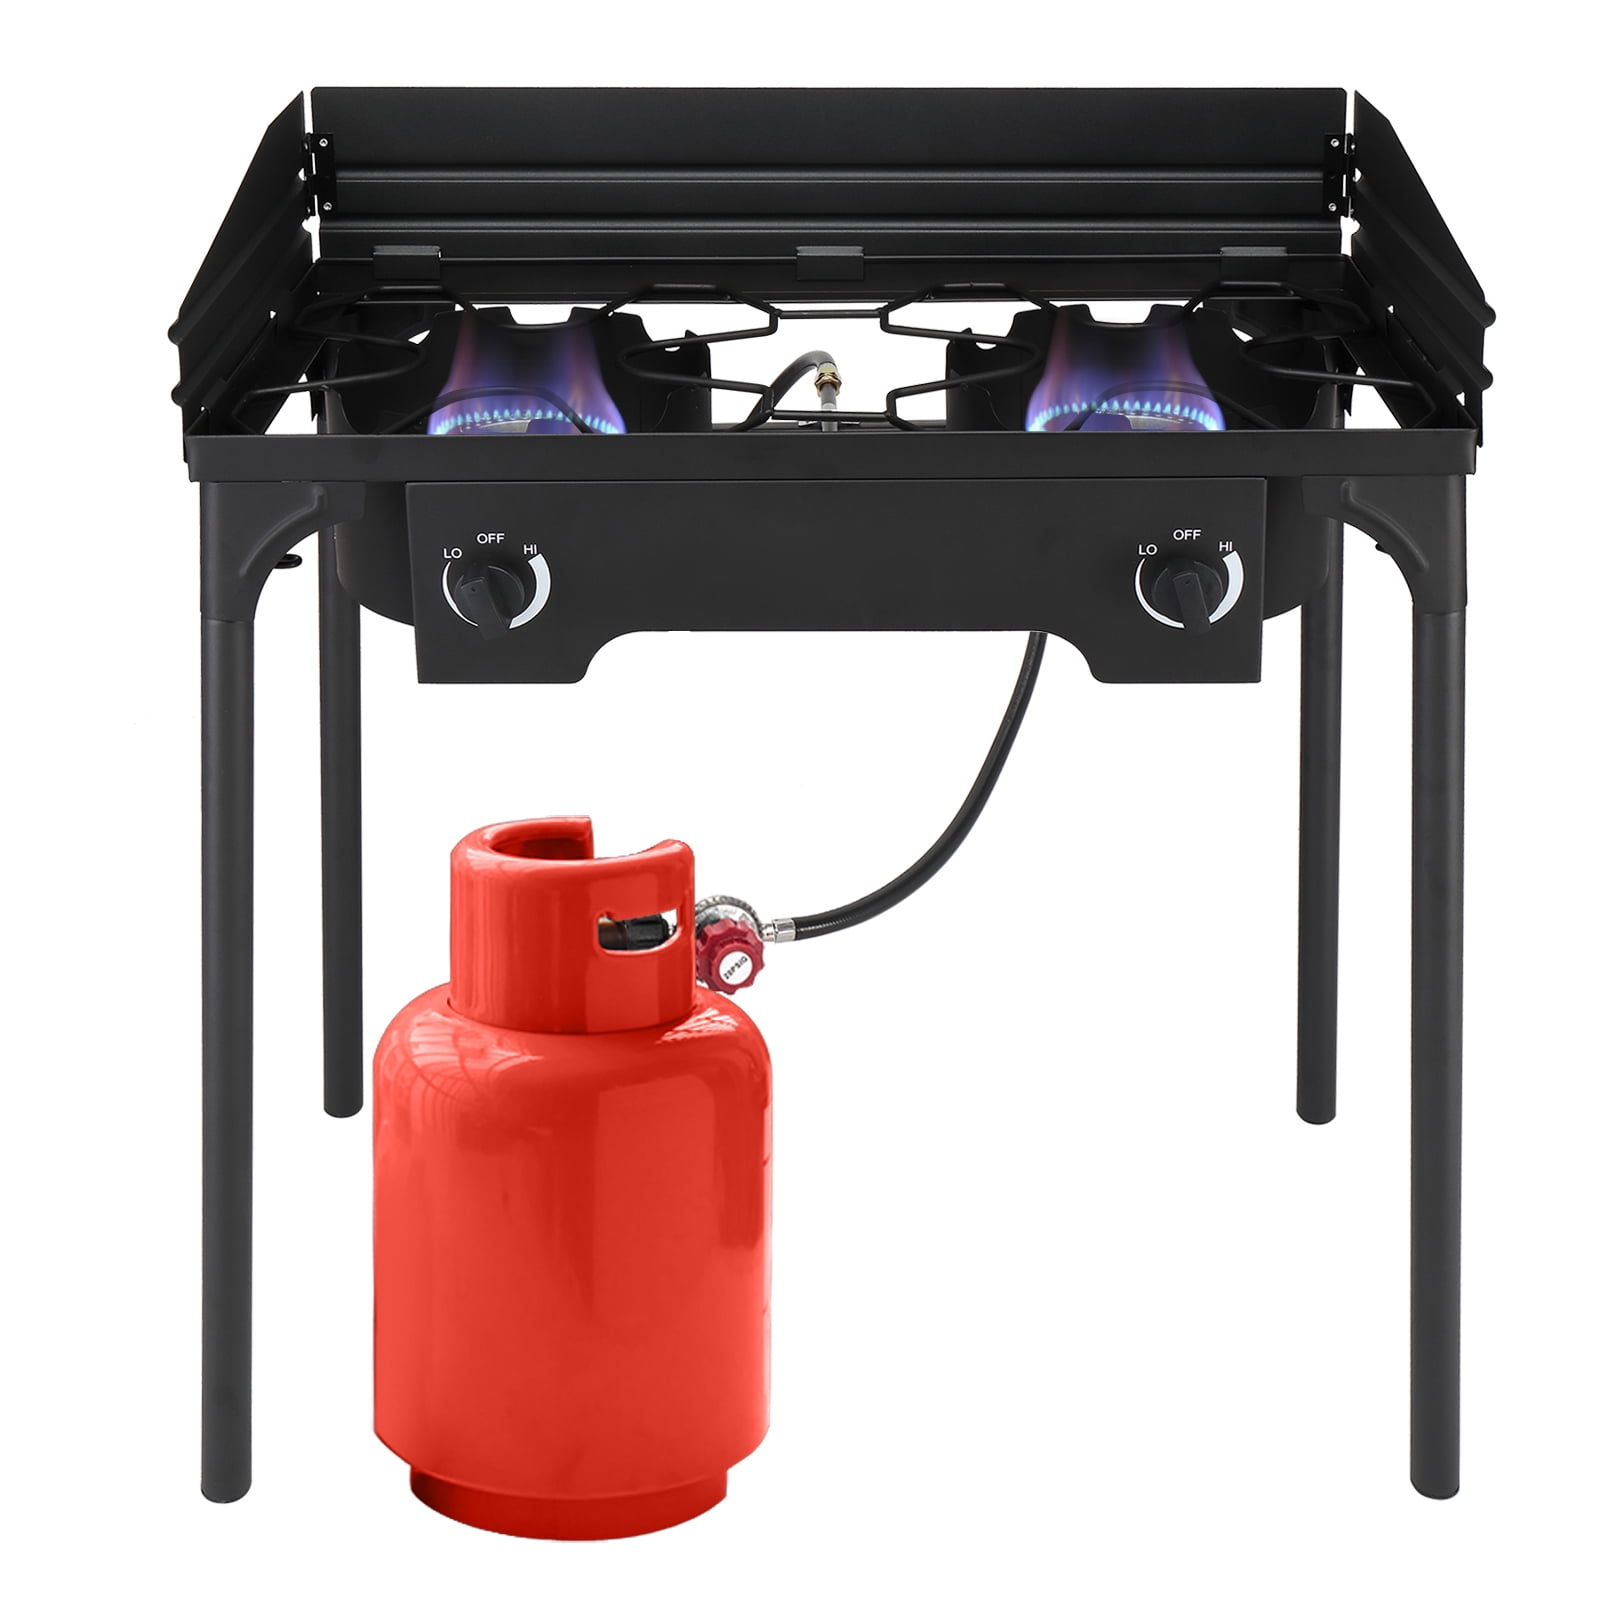 Afoxsos 20,000 BTUs Portable Propane Camp Stove with 2 Burners for Car  Camping, Tailgating, BBQ & Picnics HDDB1054 - The Home Depot